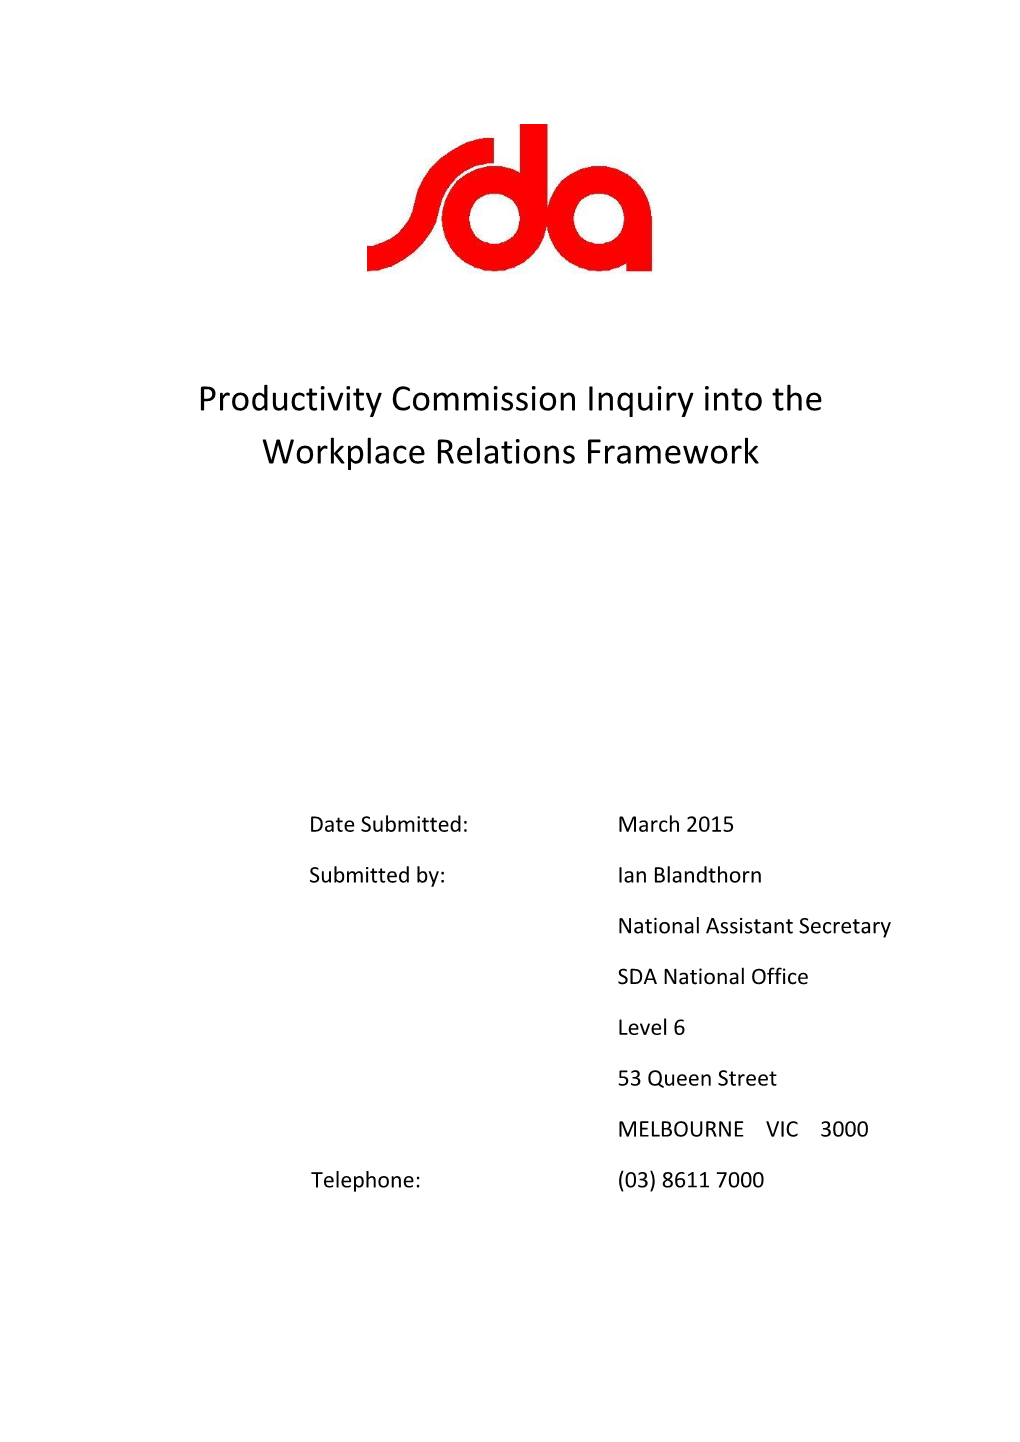 Submissions from the Shop, Distributive and Allied Employees’ Association to the Productivity Commission Review Into Workplace Relations Framework